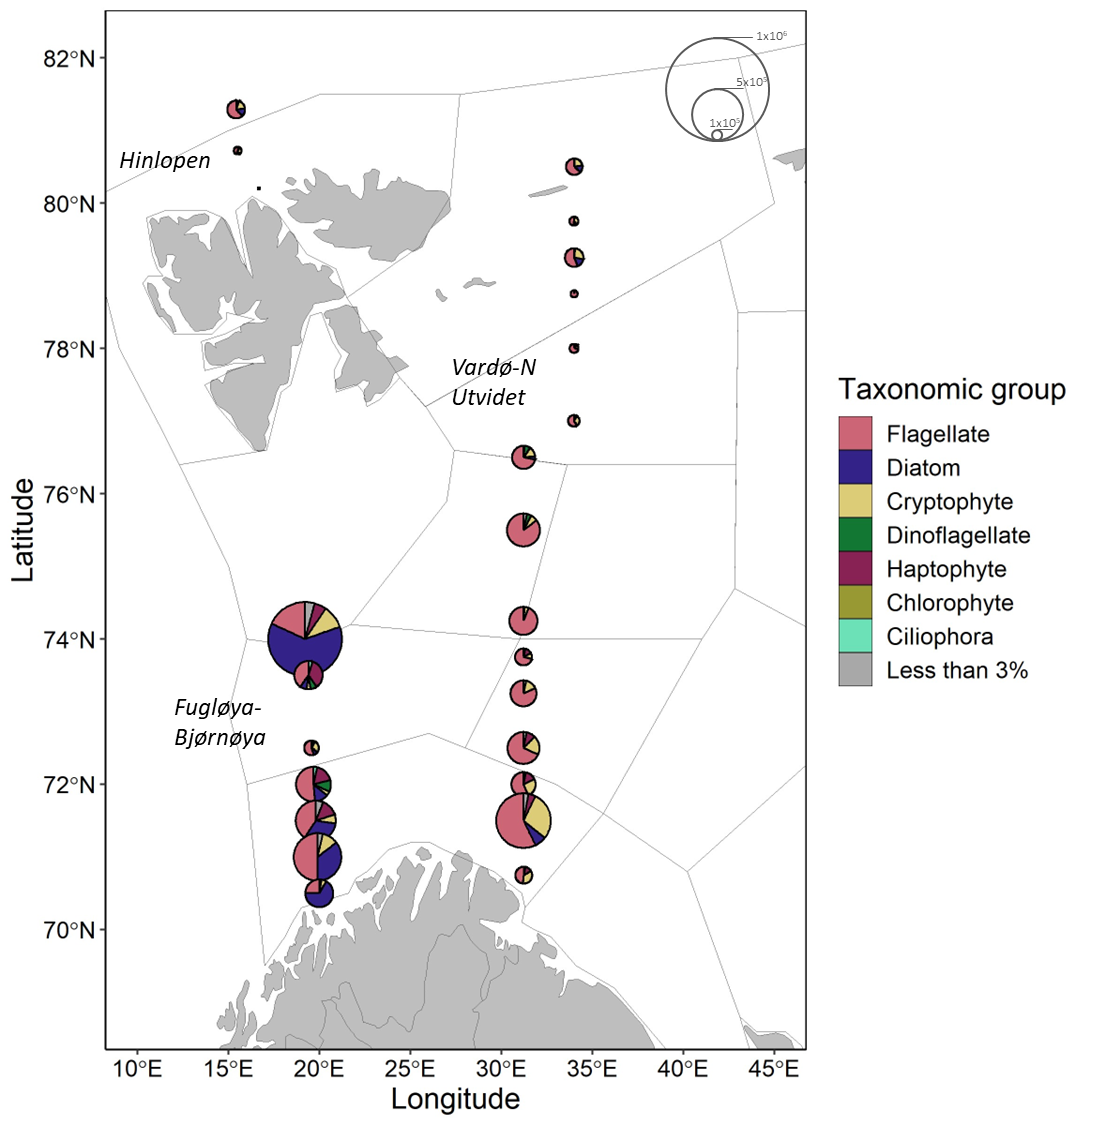 Figure 5.1.2. Maps showing microplankton community composition and abundance for samples collected August-October 2023. Pie chart radii scale to cell concentrations in cells per liter based on key. Divisions within pie charts show the contributions from broad taxonomic groups. Italicized labels indicate fixed transects. All groups which comprised < 3% of the community are summed.